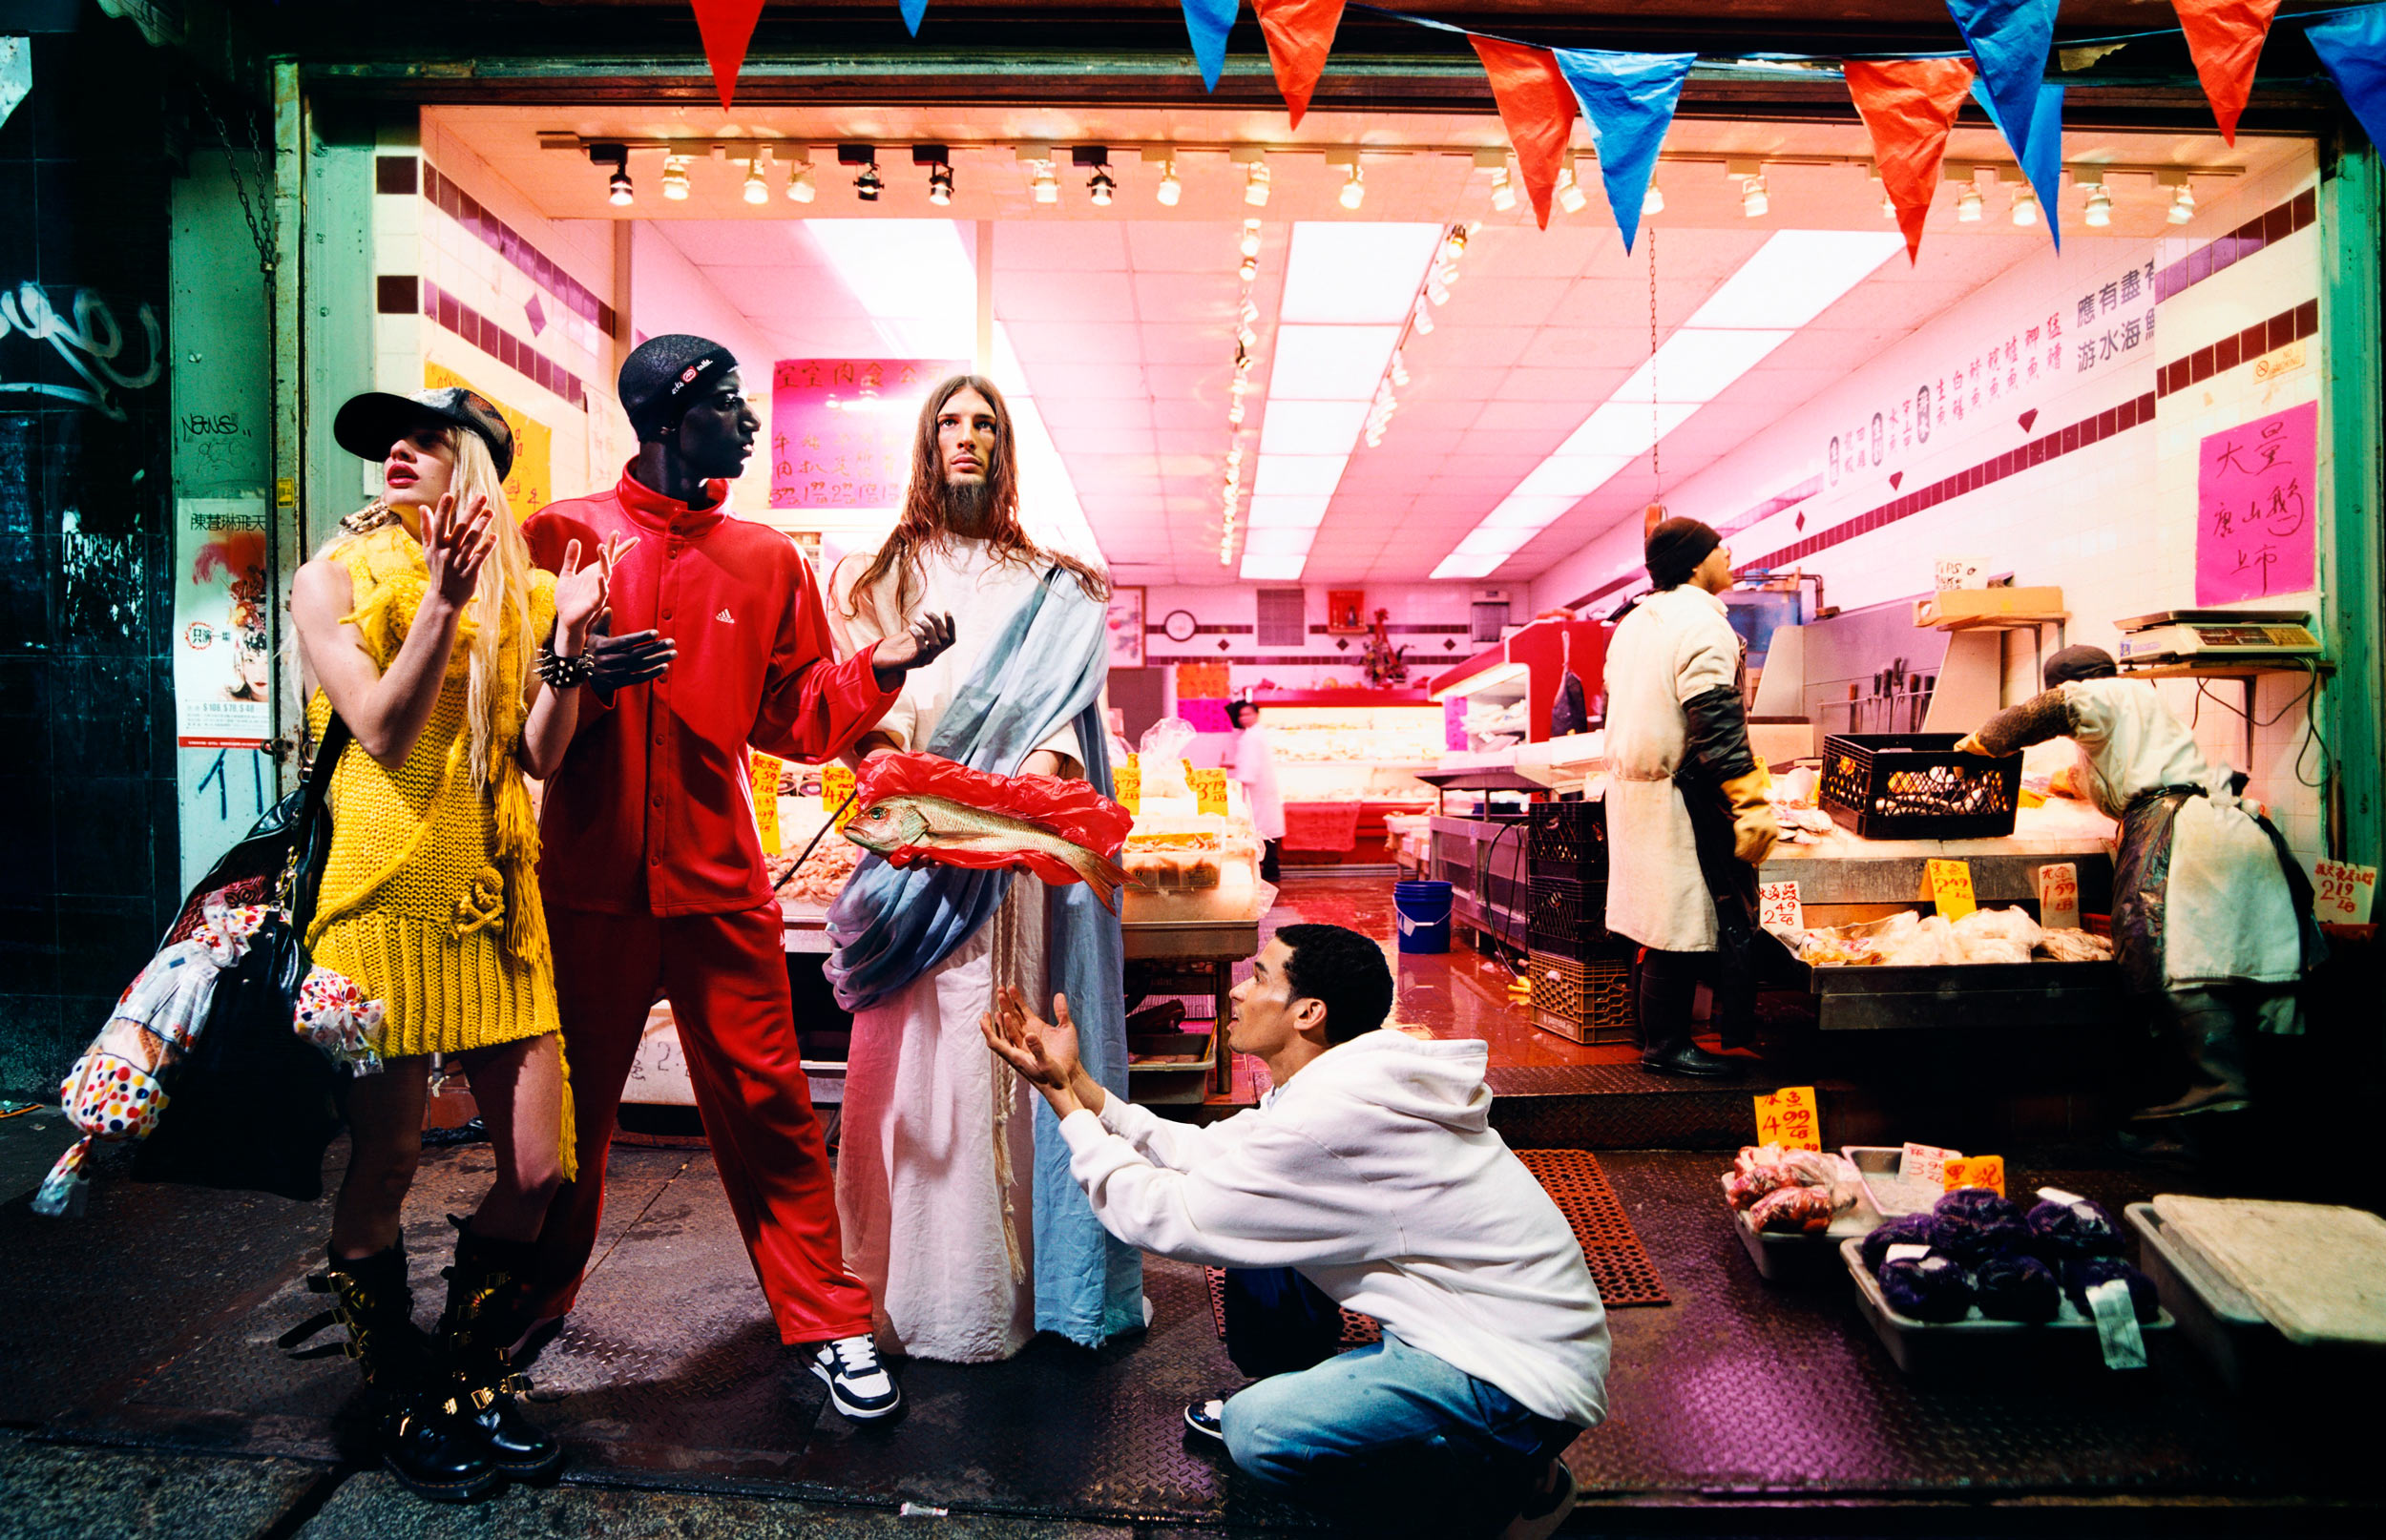 'Loaves and Fishes (from Jesus is my homeboy)' is a picture from 2003 by photographer David LaChapelle (born 1963).<br/>